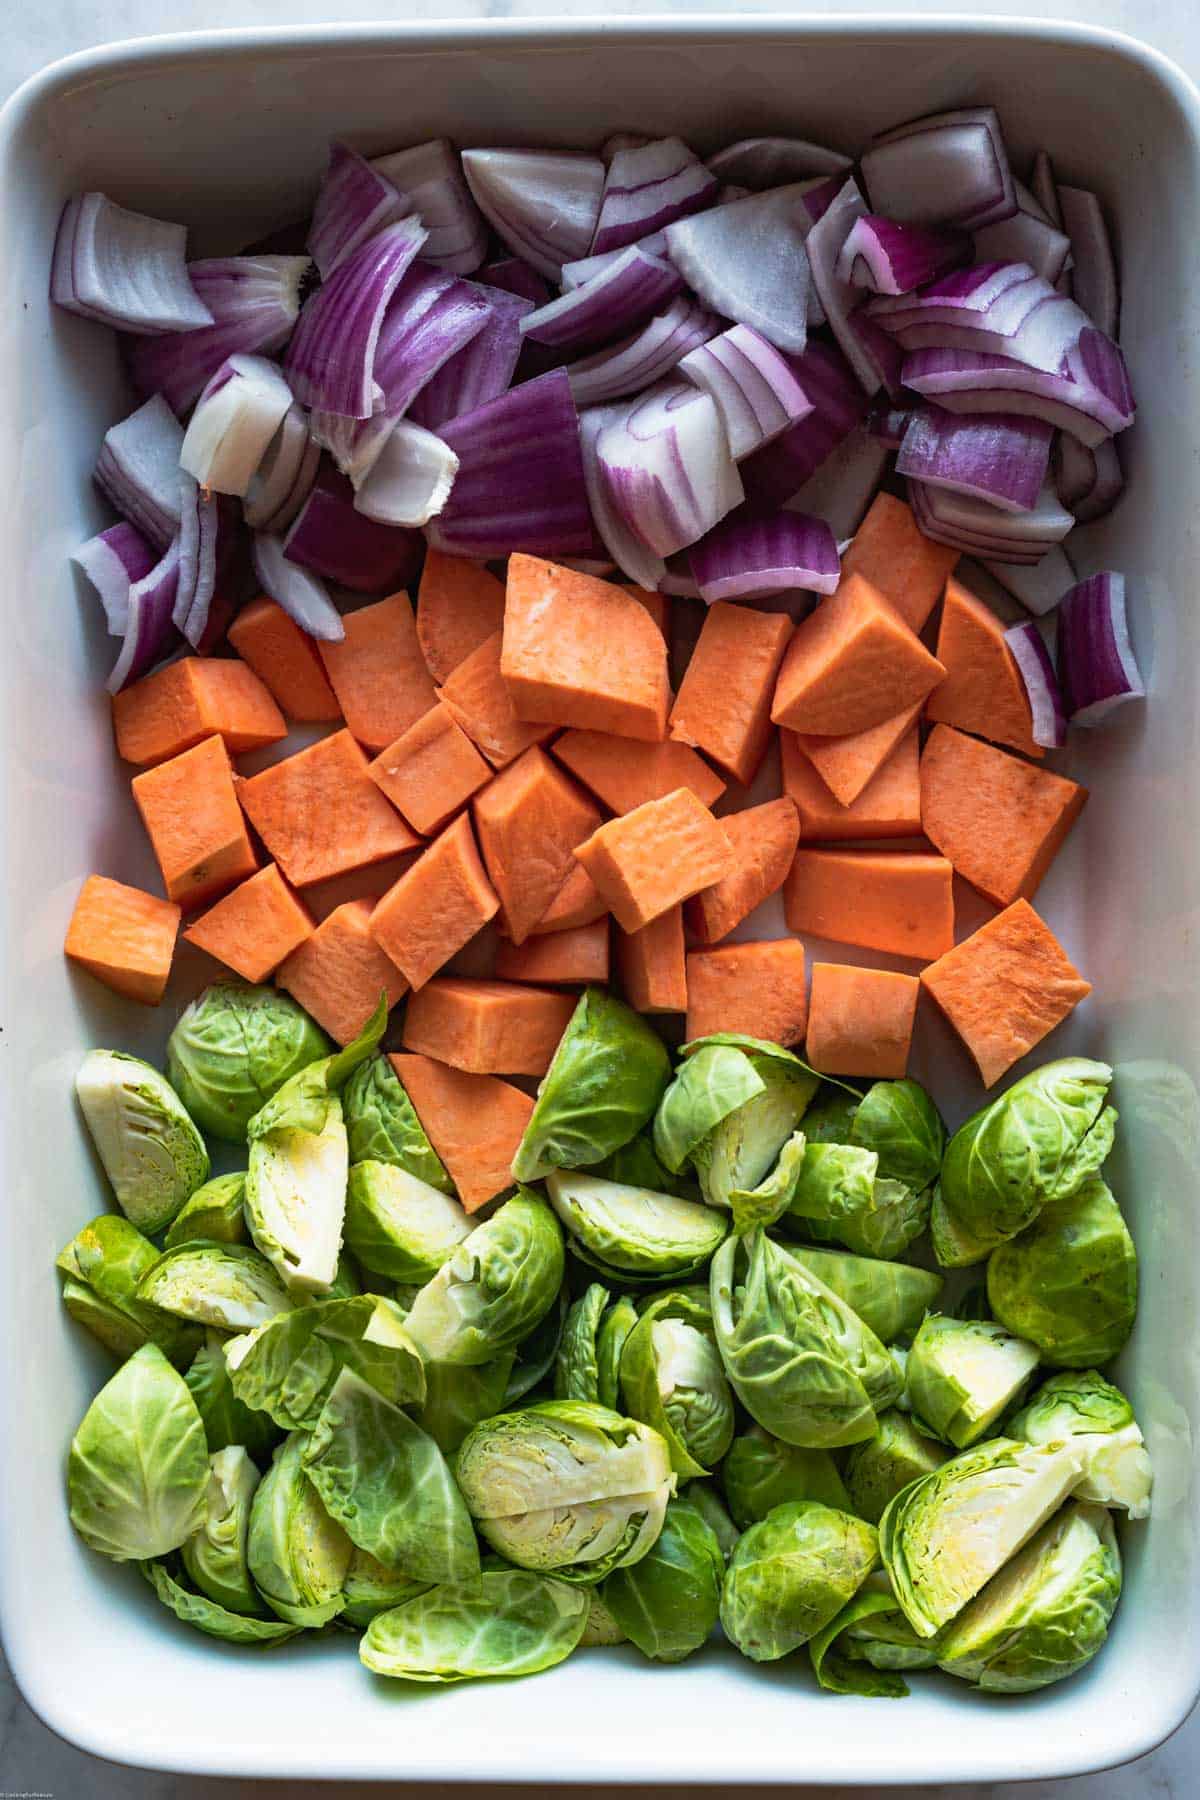 Chopped red onion, sweet potato, and Brussels sprouts in a large casserole dish.